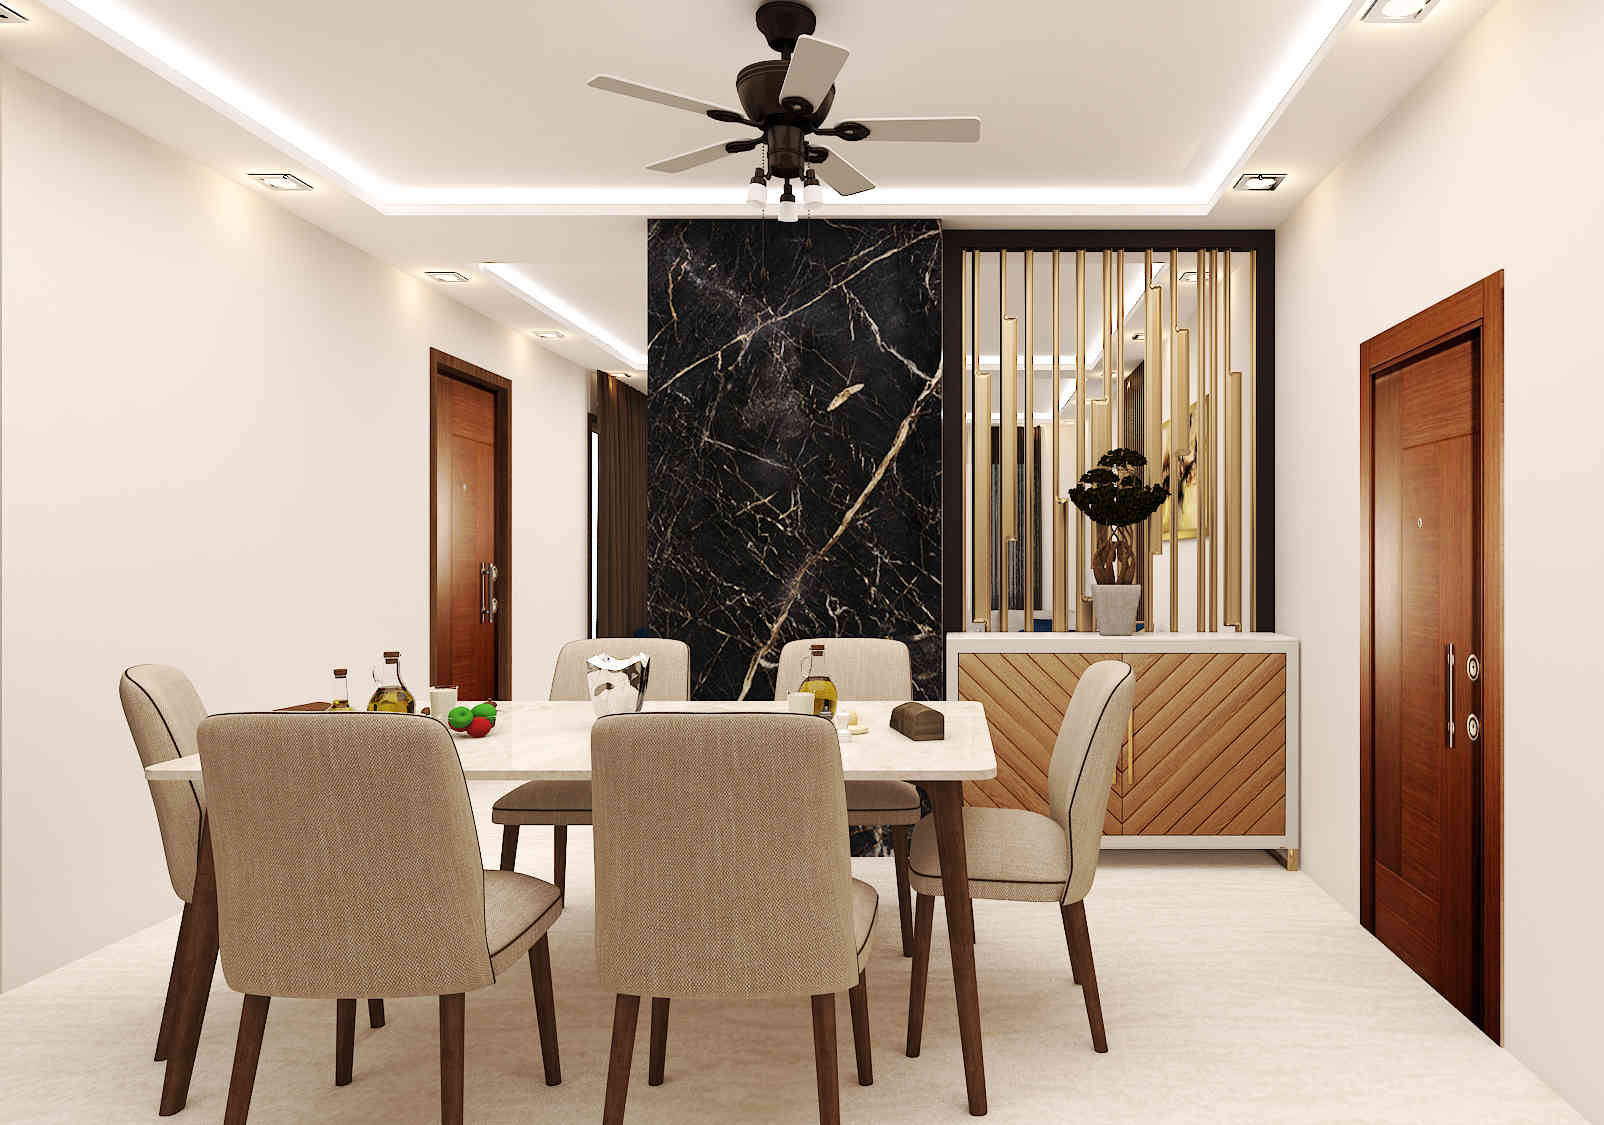 Luxury Dining Room Design With Square Ceiling Light